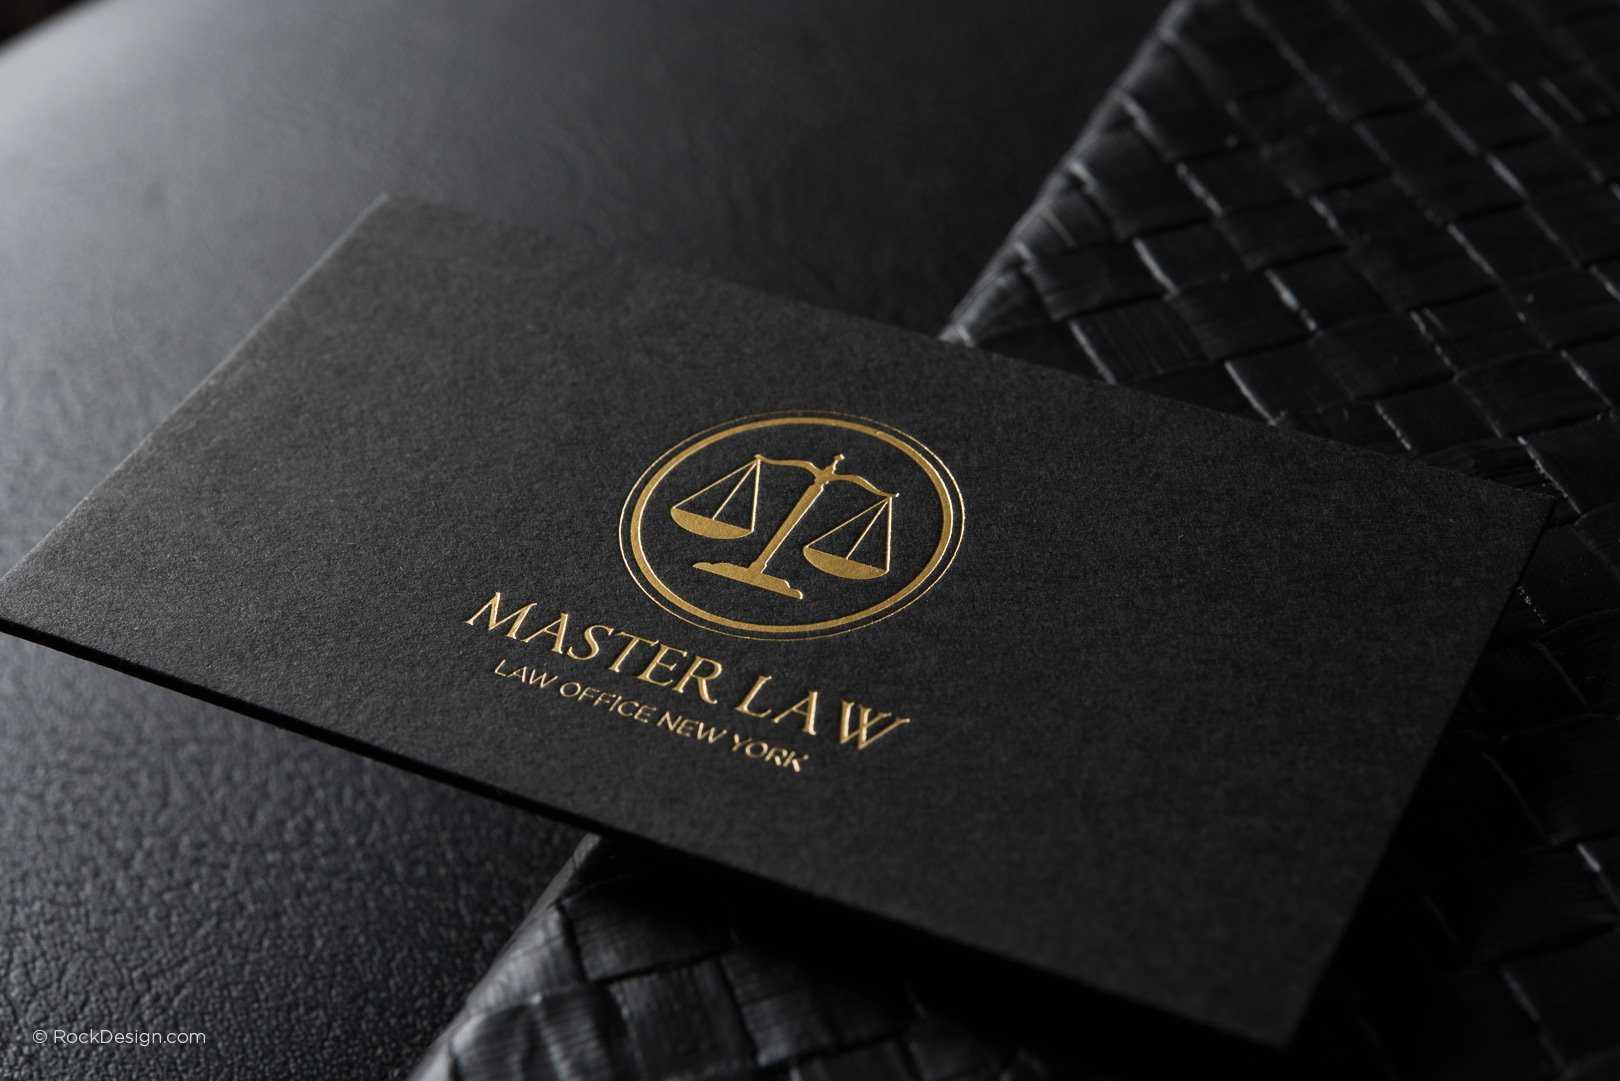 Free Lawyer Business Card Template | Rockdesign Inside Legal Business Cards Templates Free